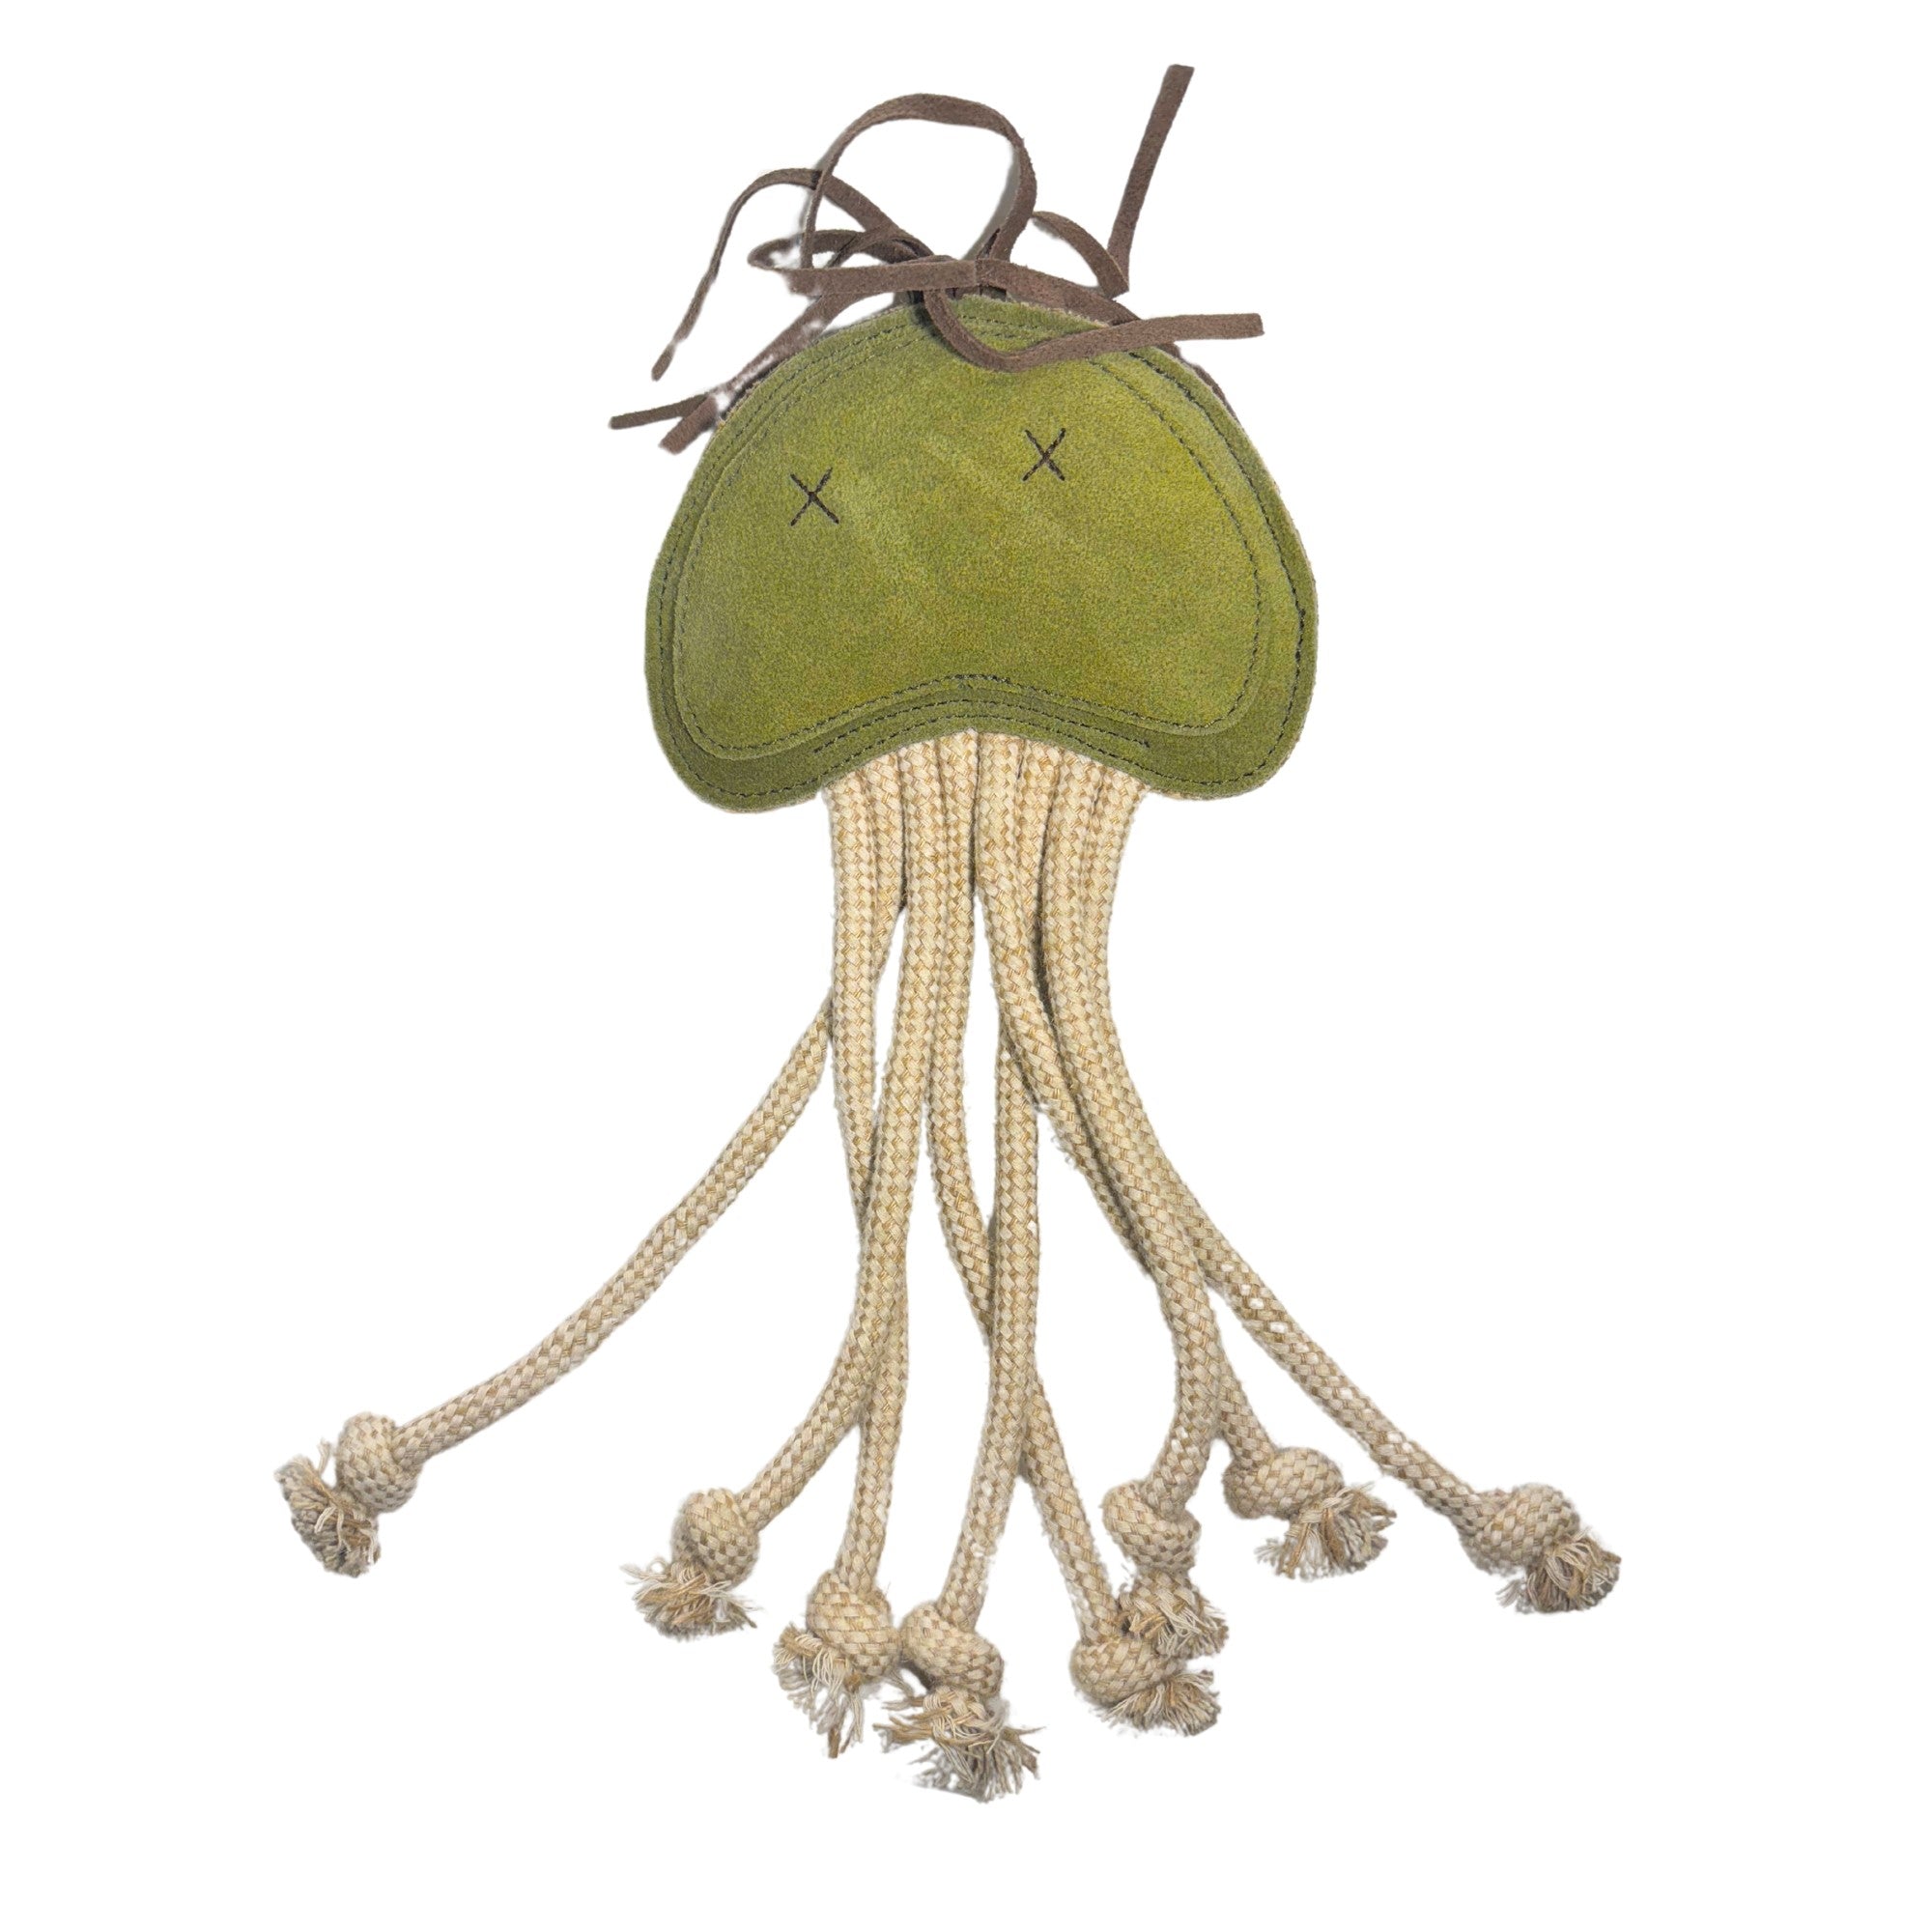 A decorative Joe Jellyfish - grass hanging piece, featuring a green plush top with an 'x' stitched as eyes and thin, cotton rope tentacles ending in knotted fringes, isolated on a white background. Brand: Georgie Paws